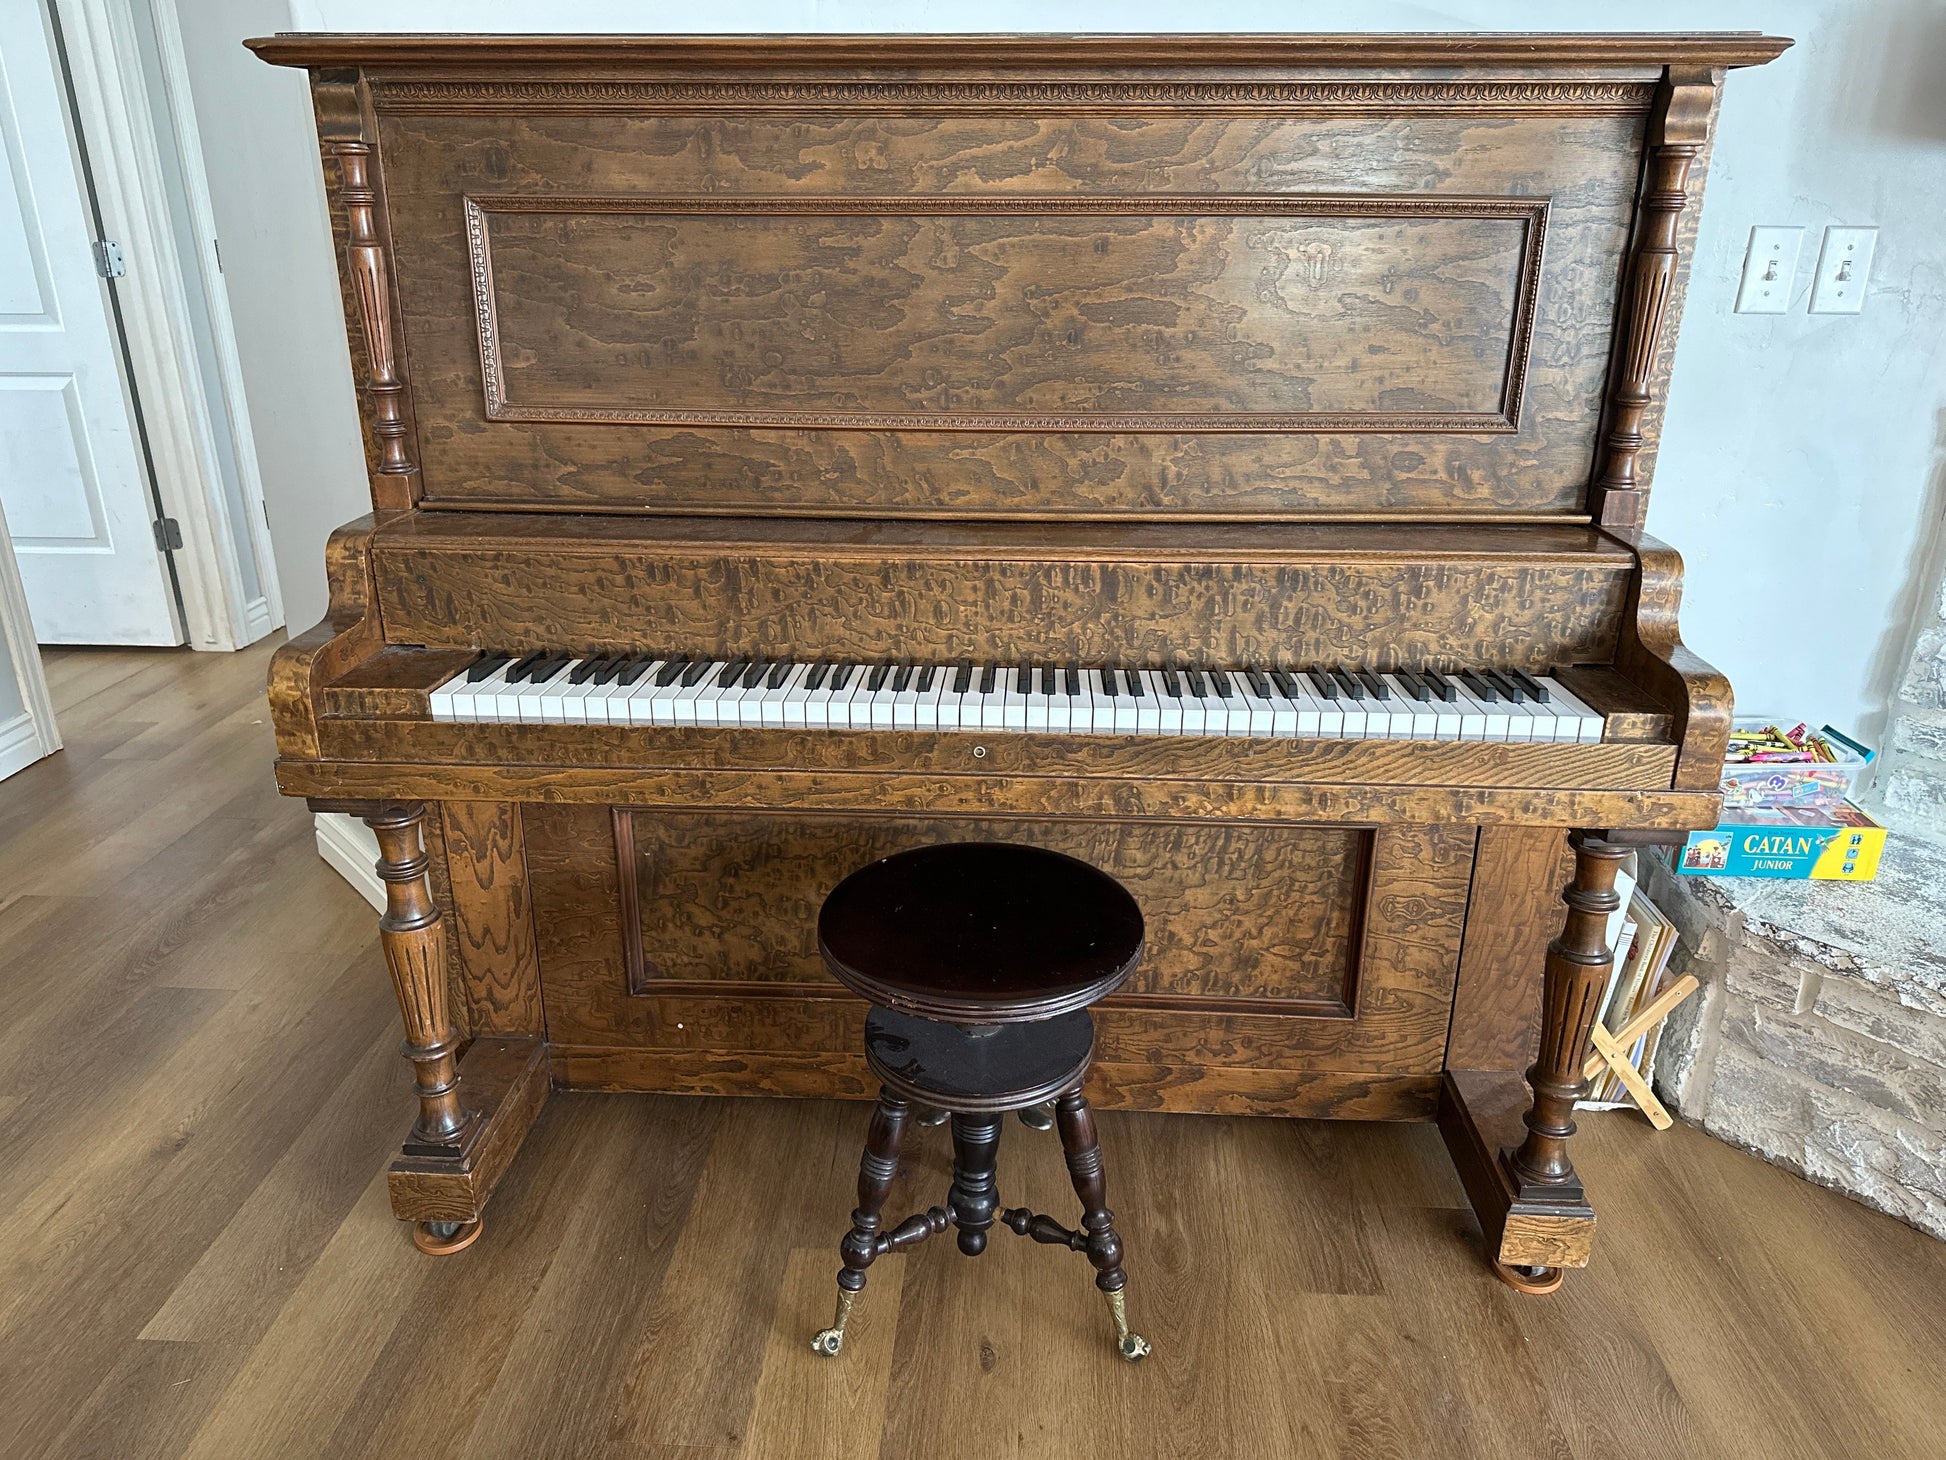 Image 2 of The Cox Family Piano!